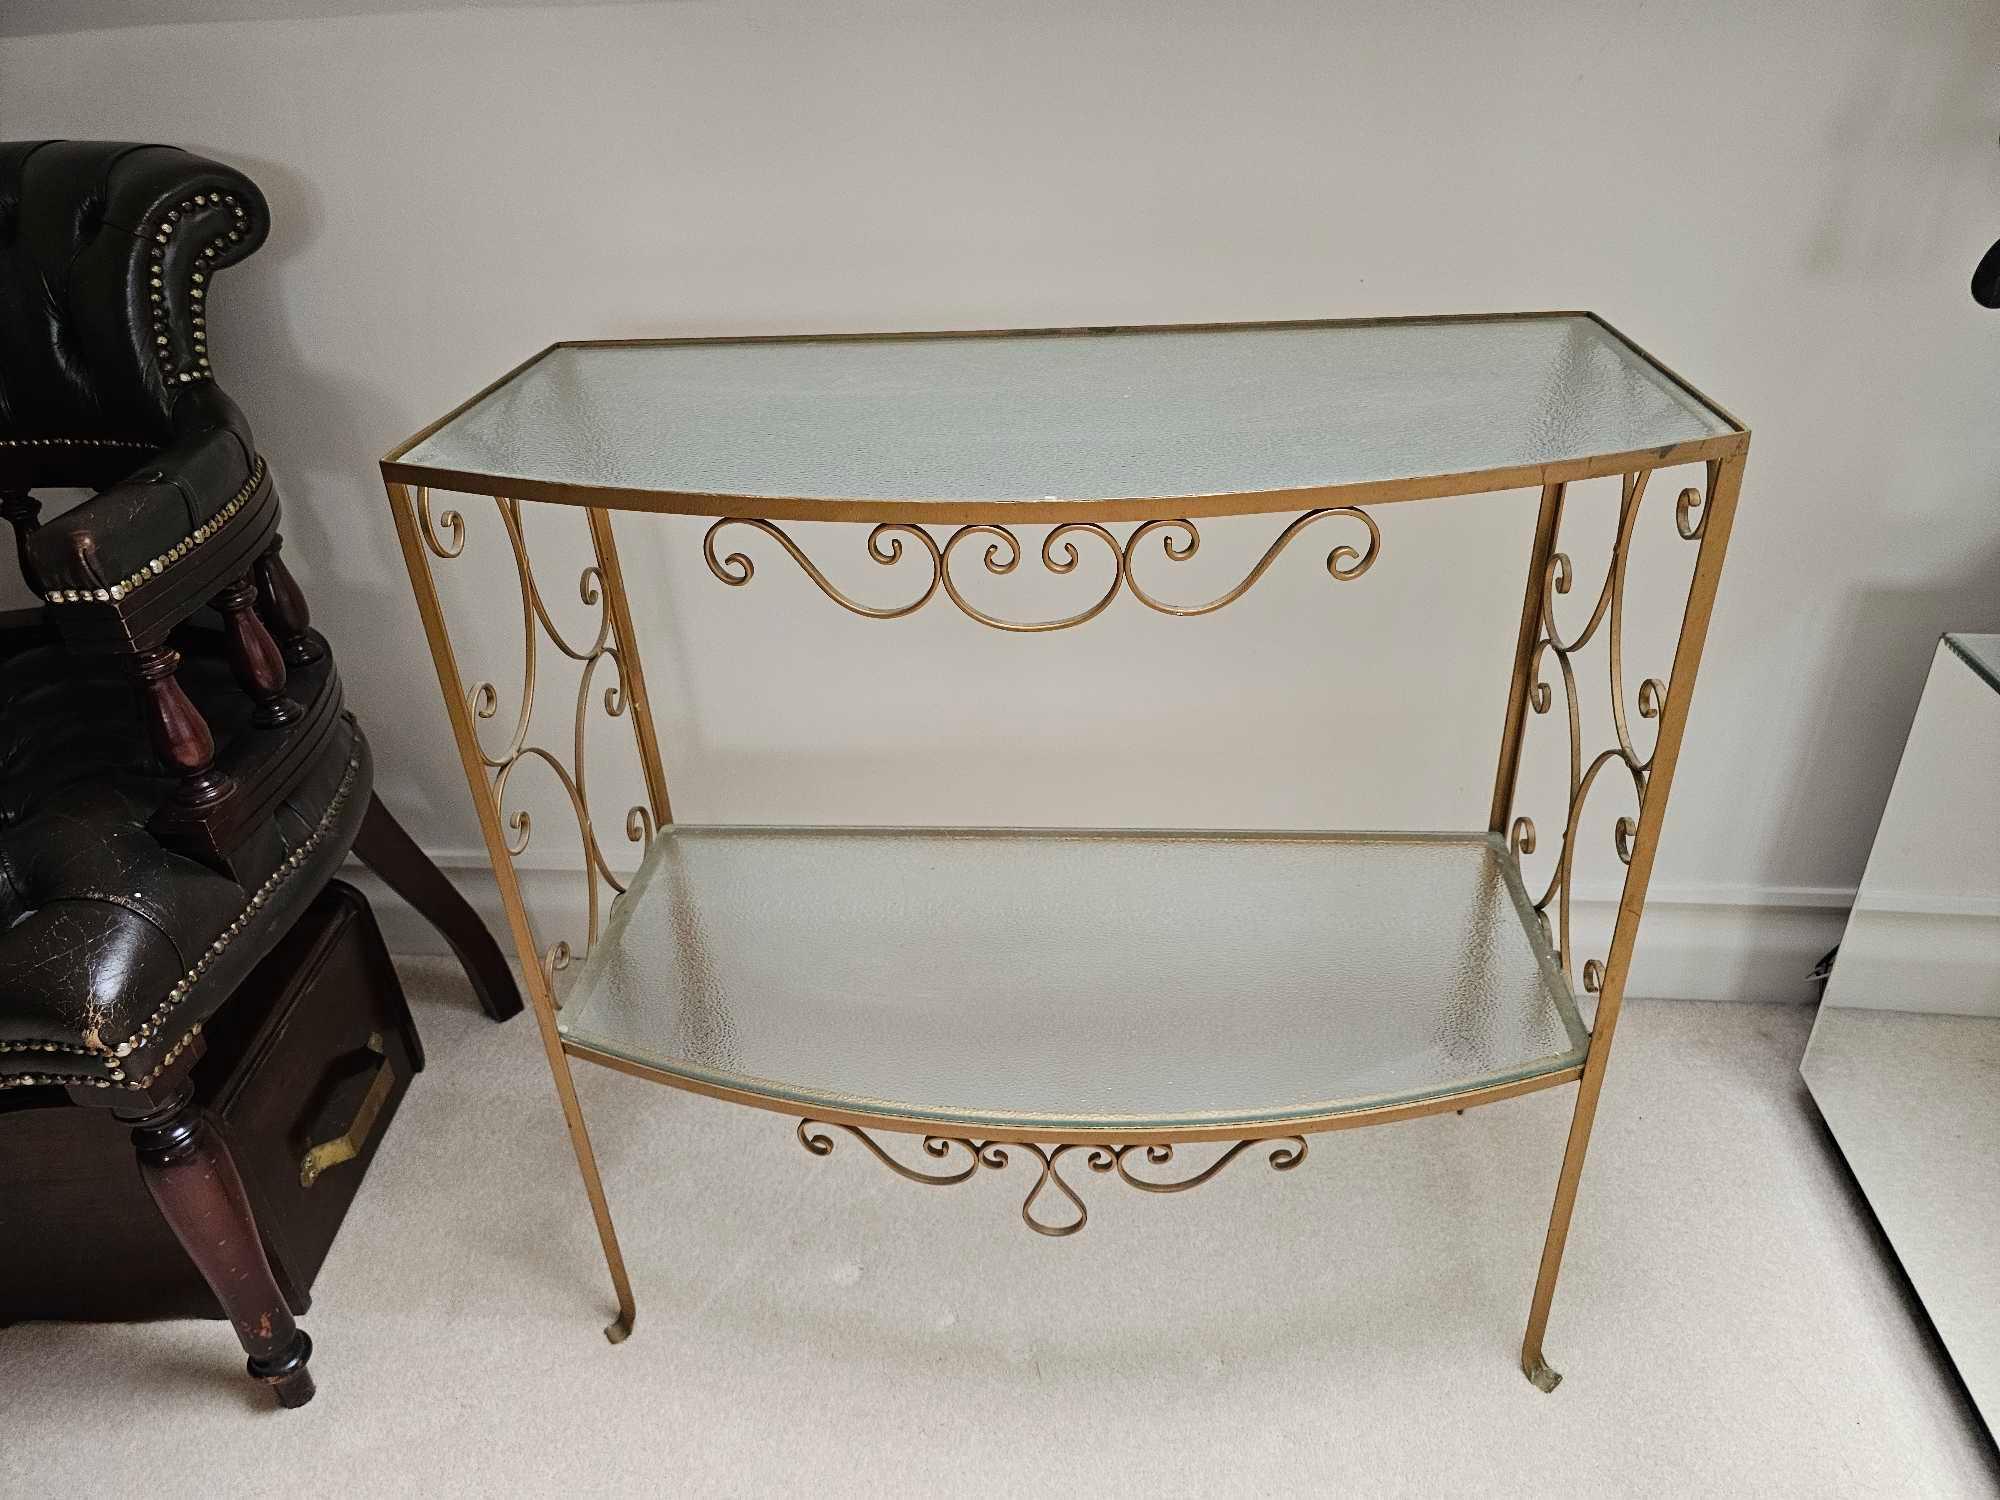 A Cast Metal Scroll Work Painted Console Table With Opaque Glass Top And Under Tier 74 X 36 X 75cm